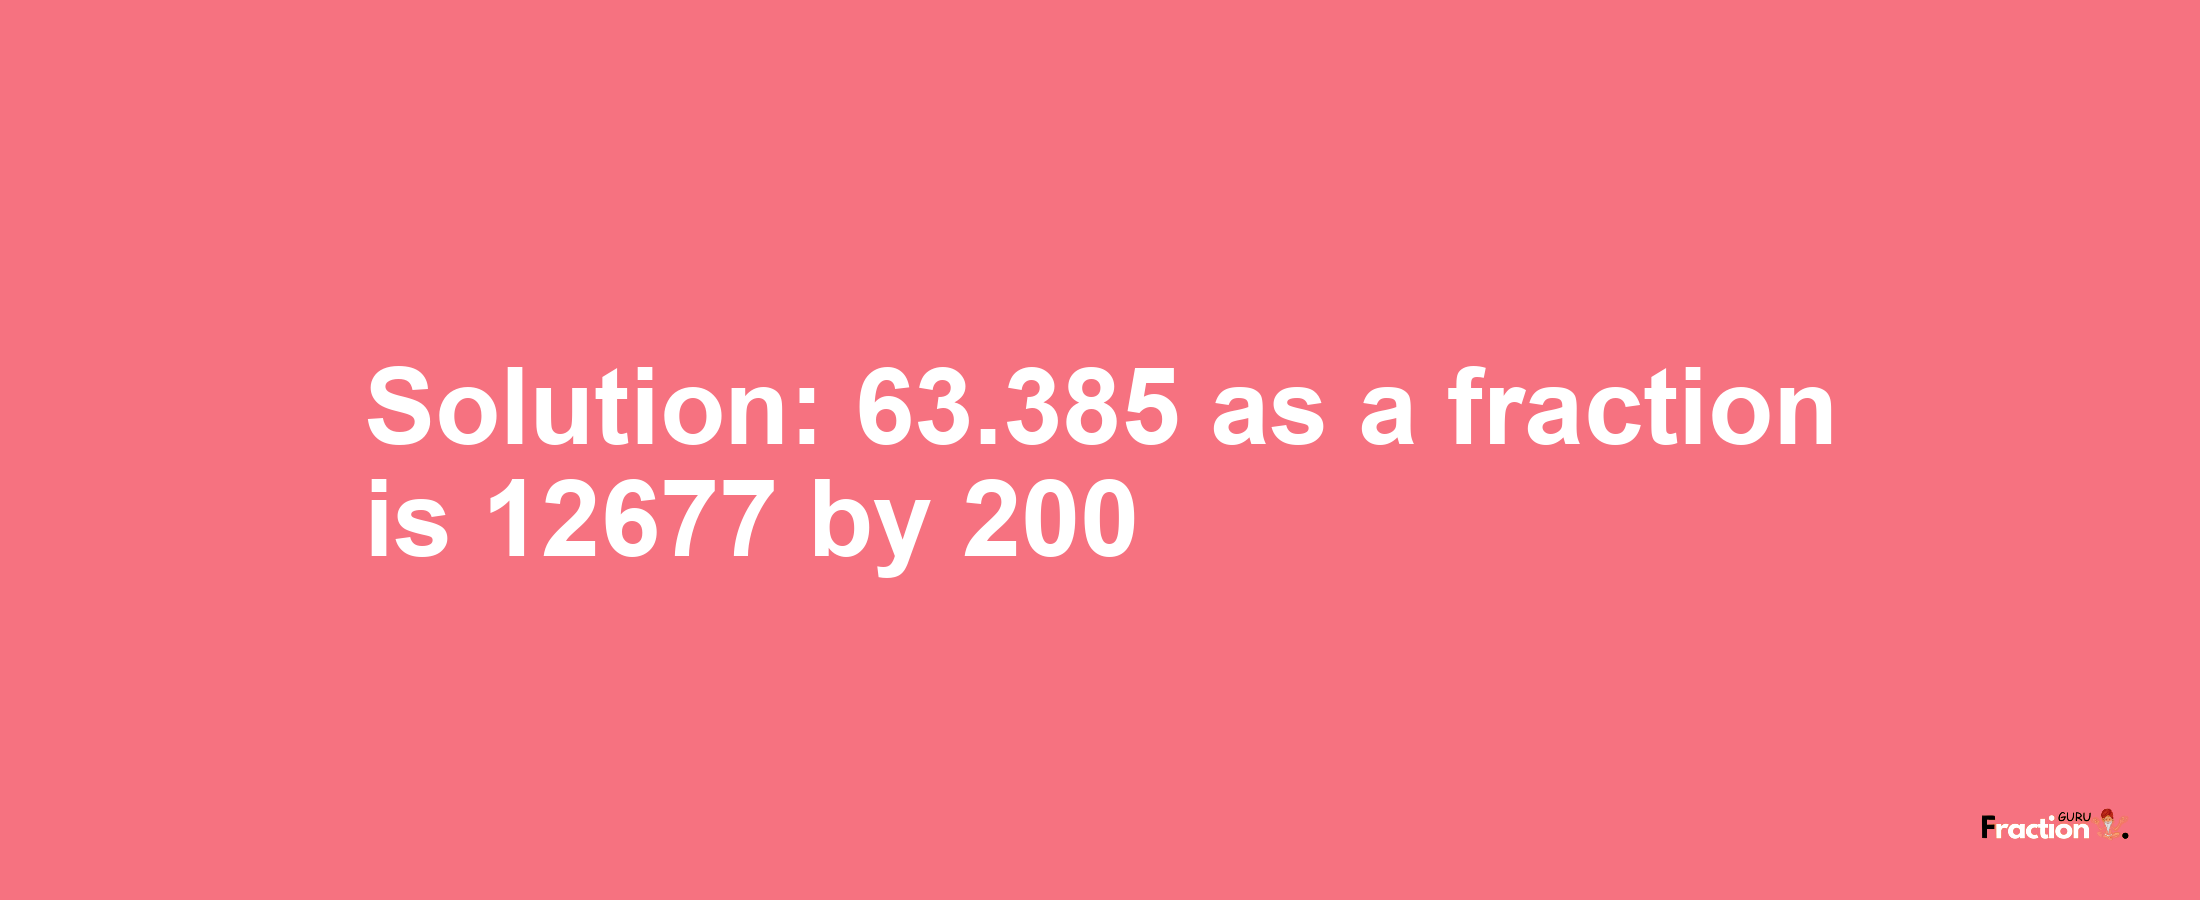 Solution:63.385 as a fraction is 12677/200